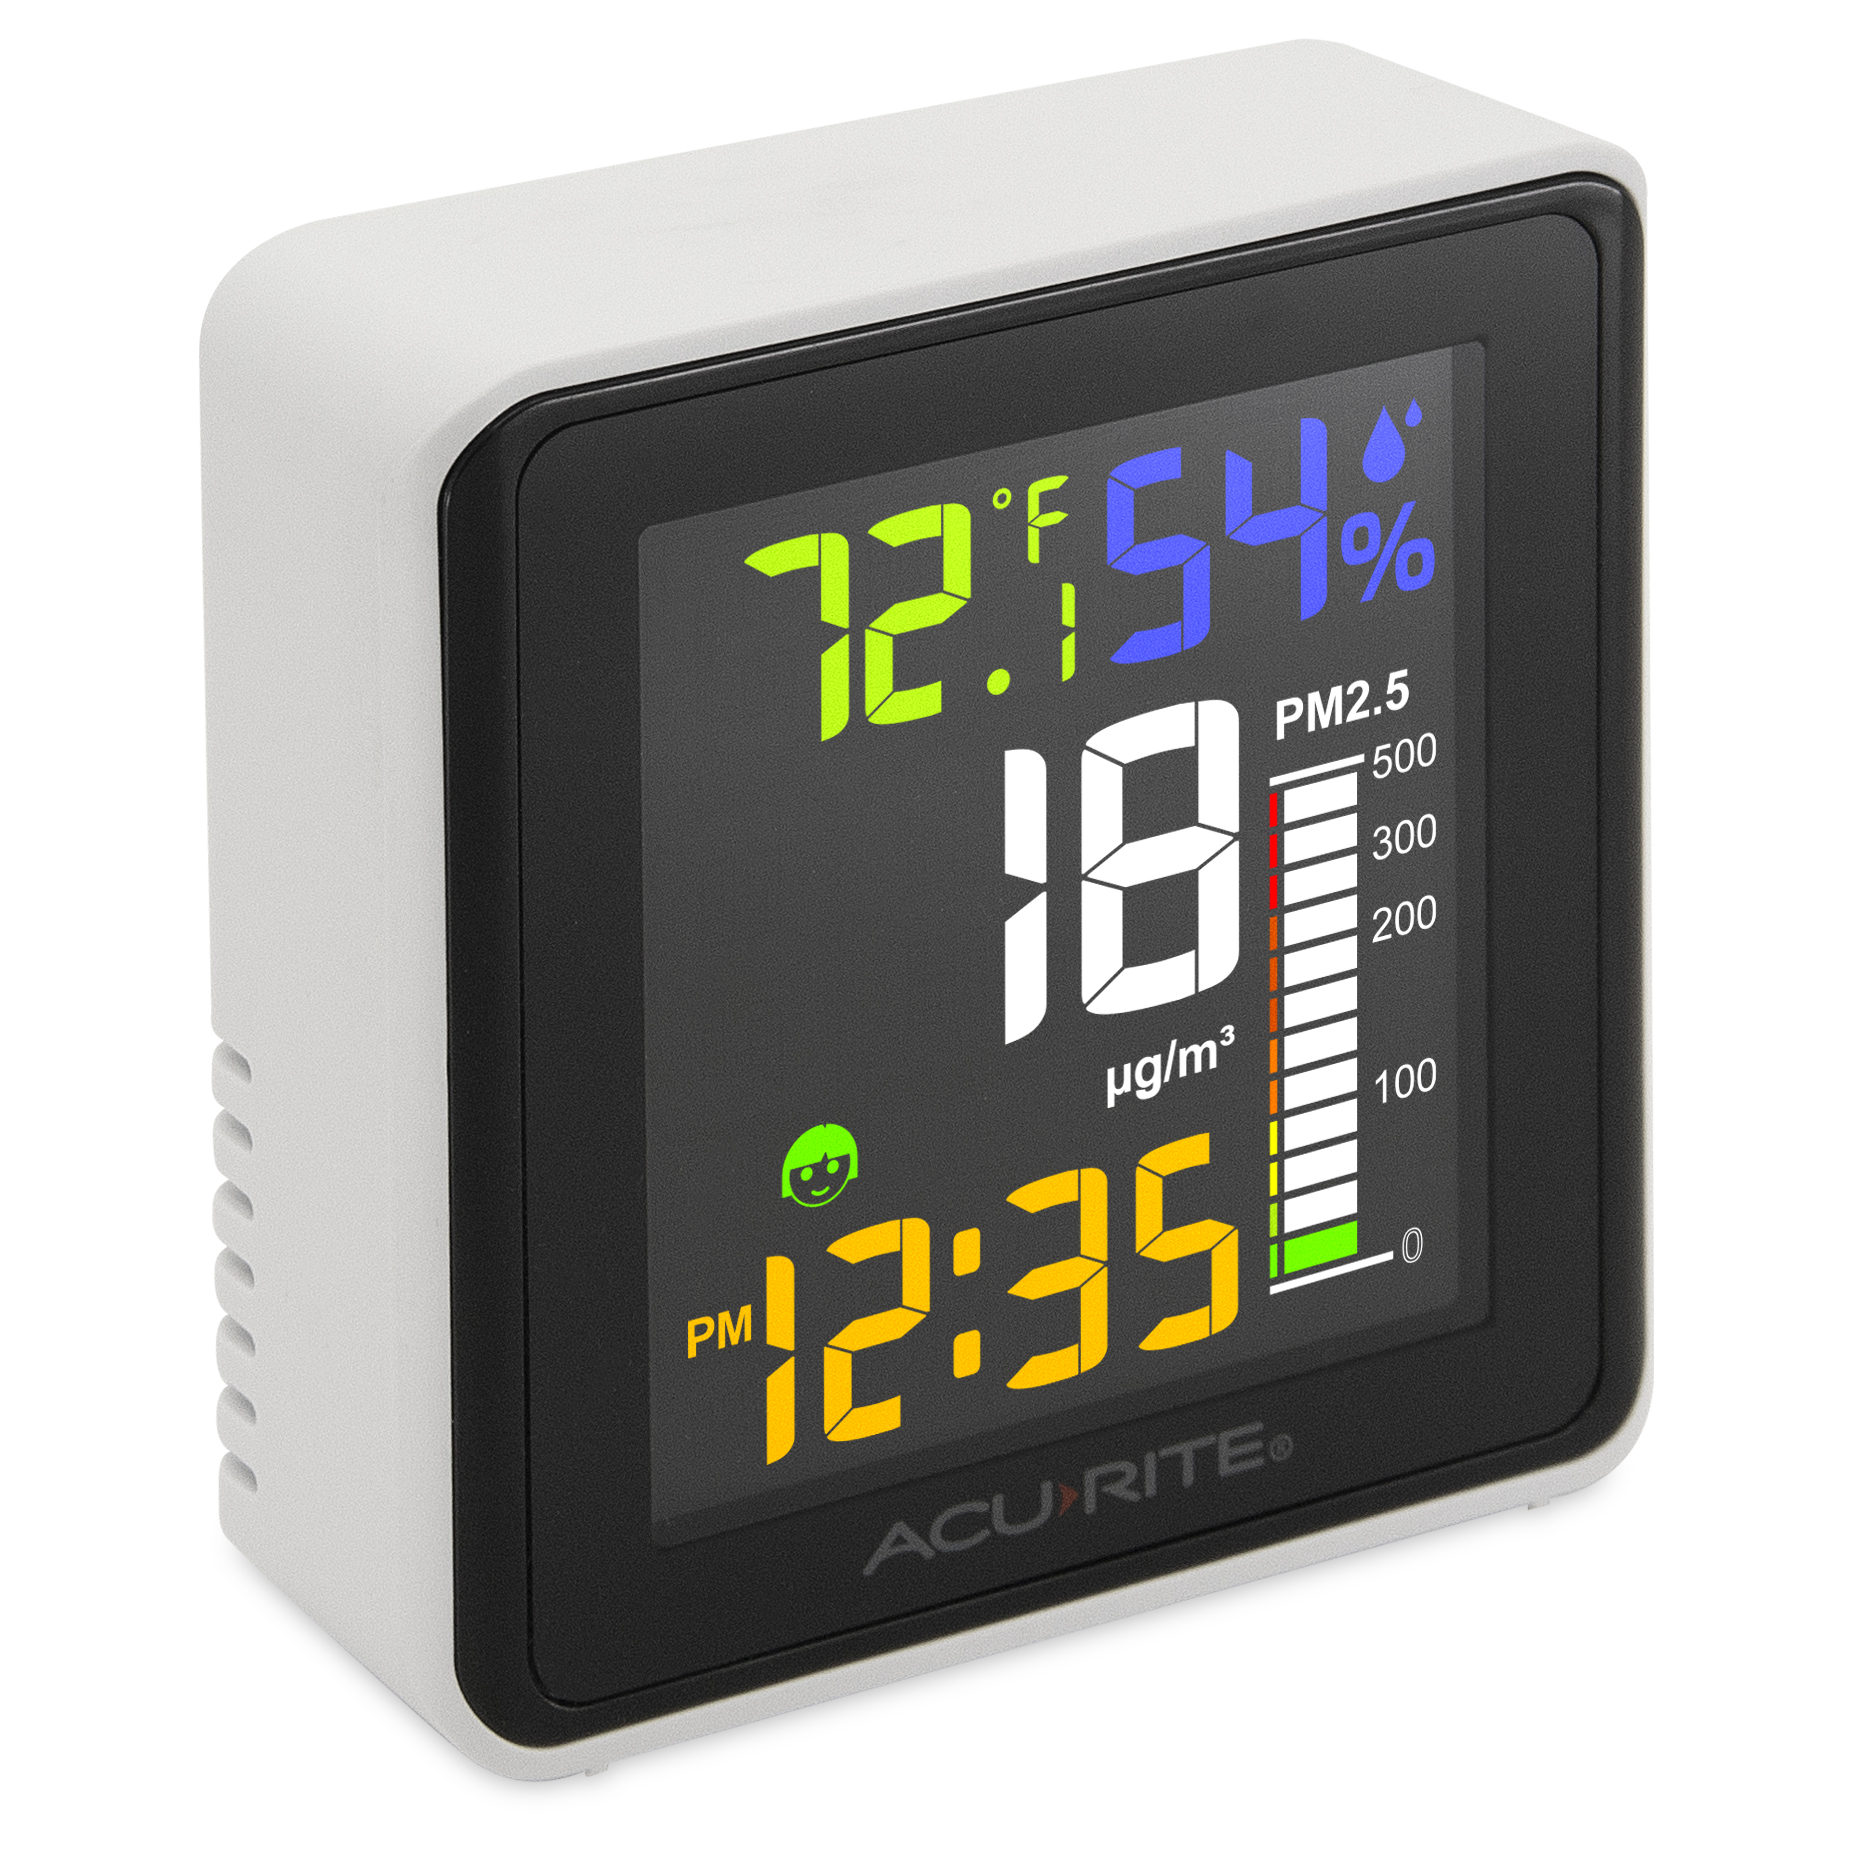 AcuRite AIR® Indoor Air Quality Monitor with PM2.5, Temperature, and Humidity Measurements (01412M) - image 1 of 9